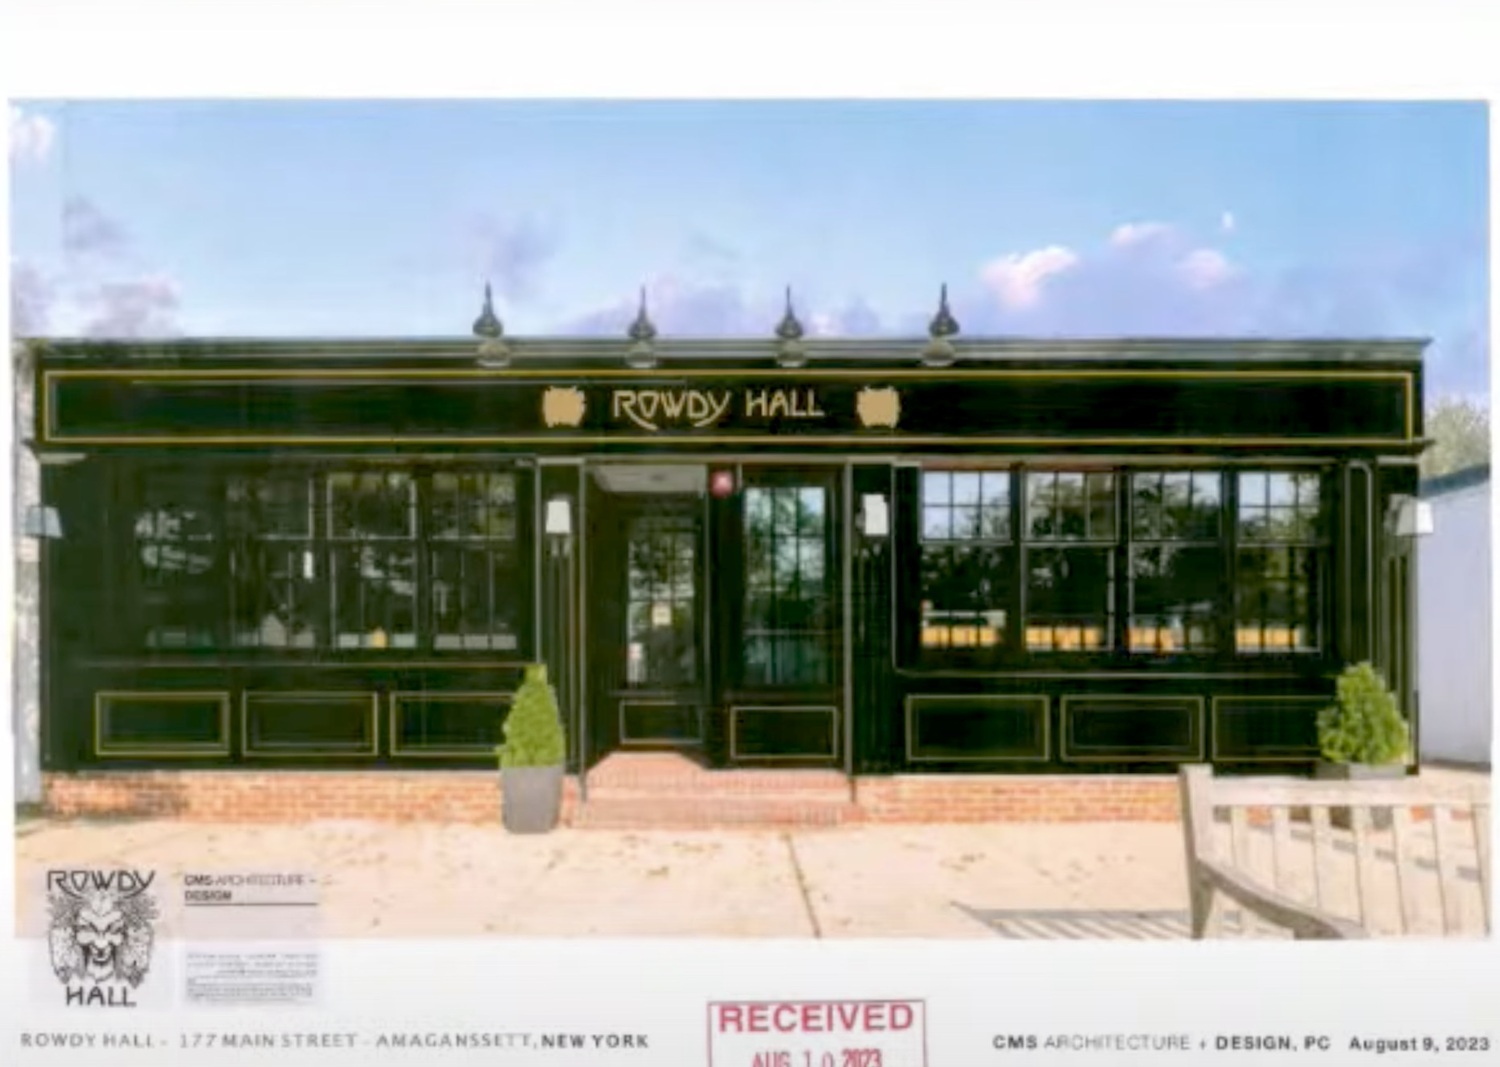 The proposed facade of the new Rowdy Hall, which was black like the front of the popular pub's current East Hampton Village location.